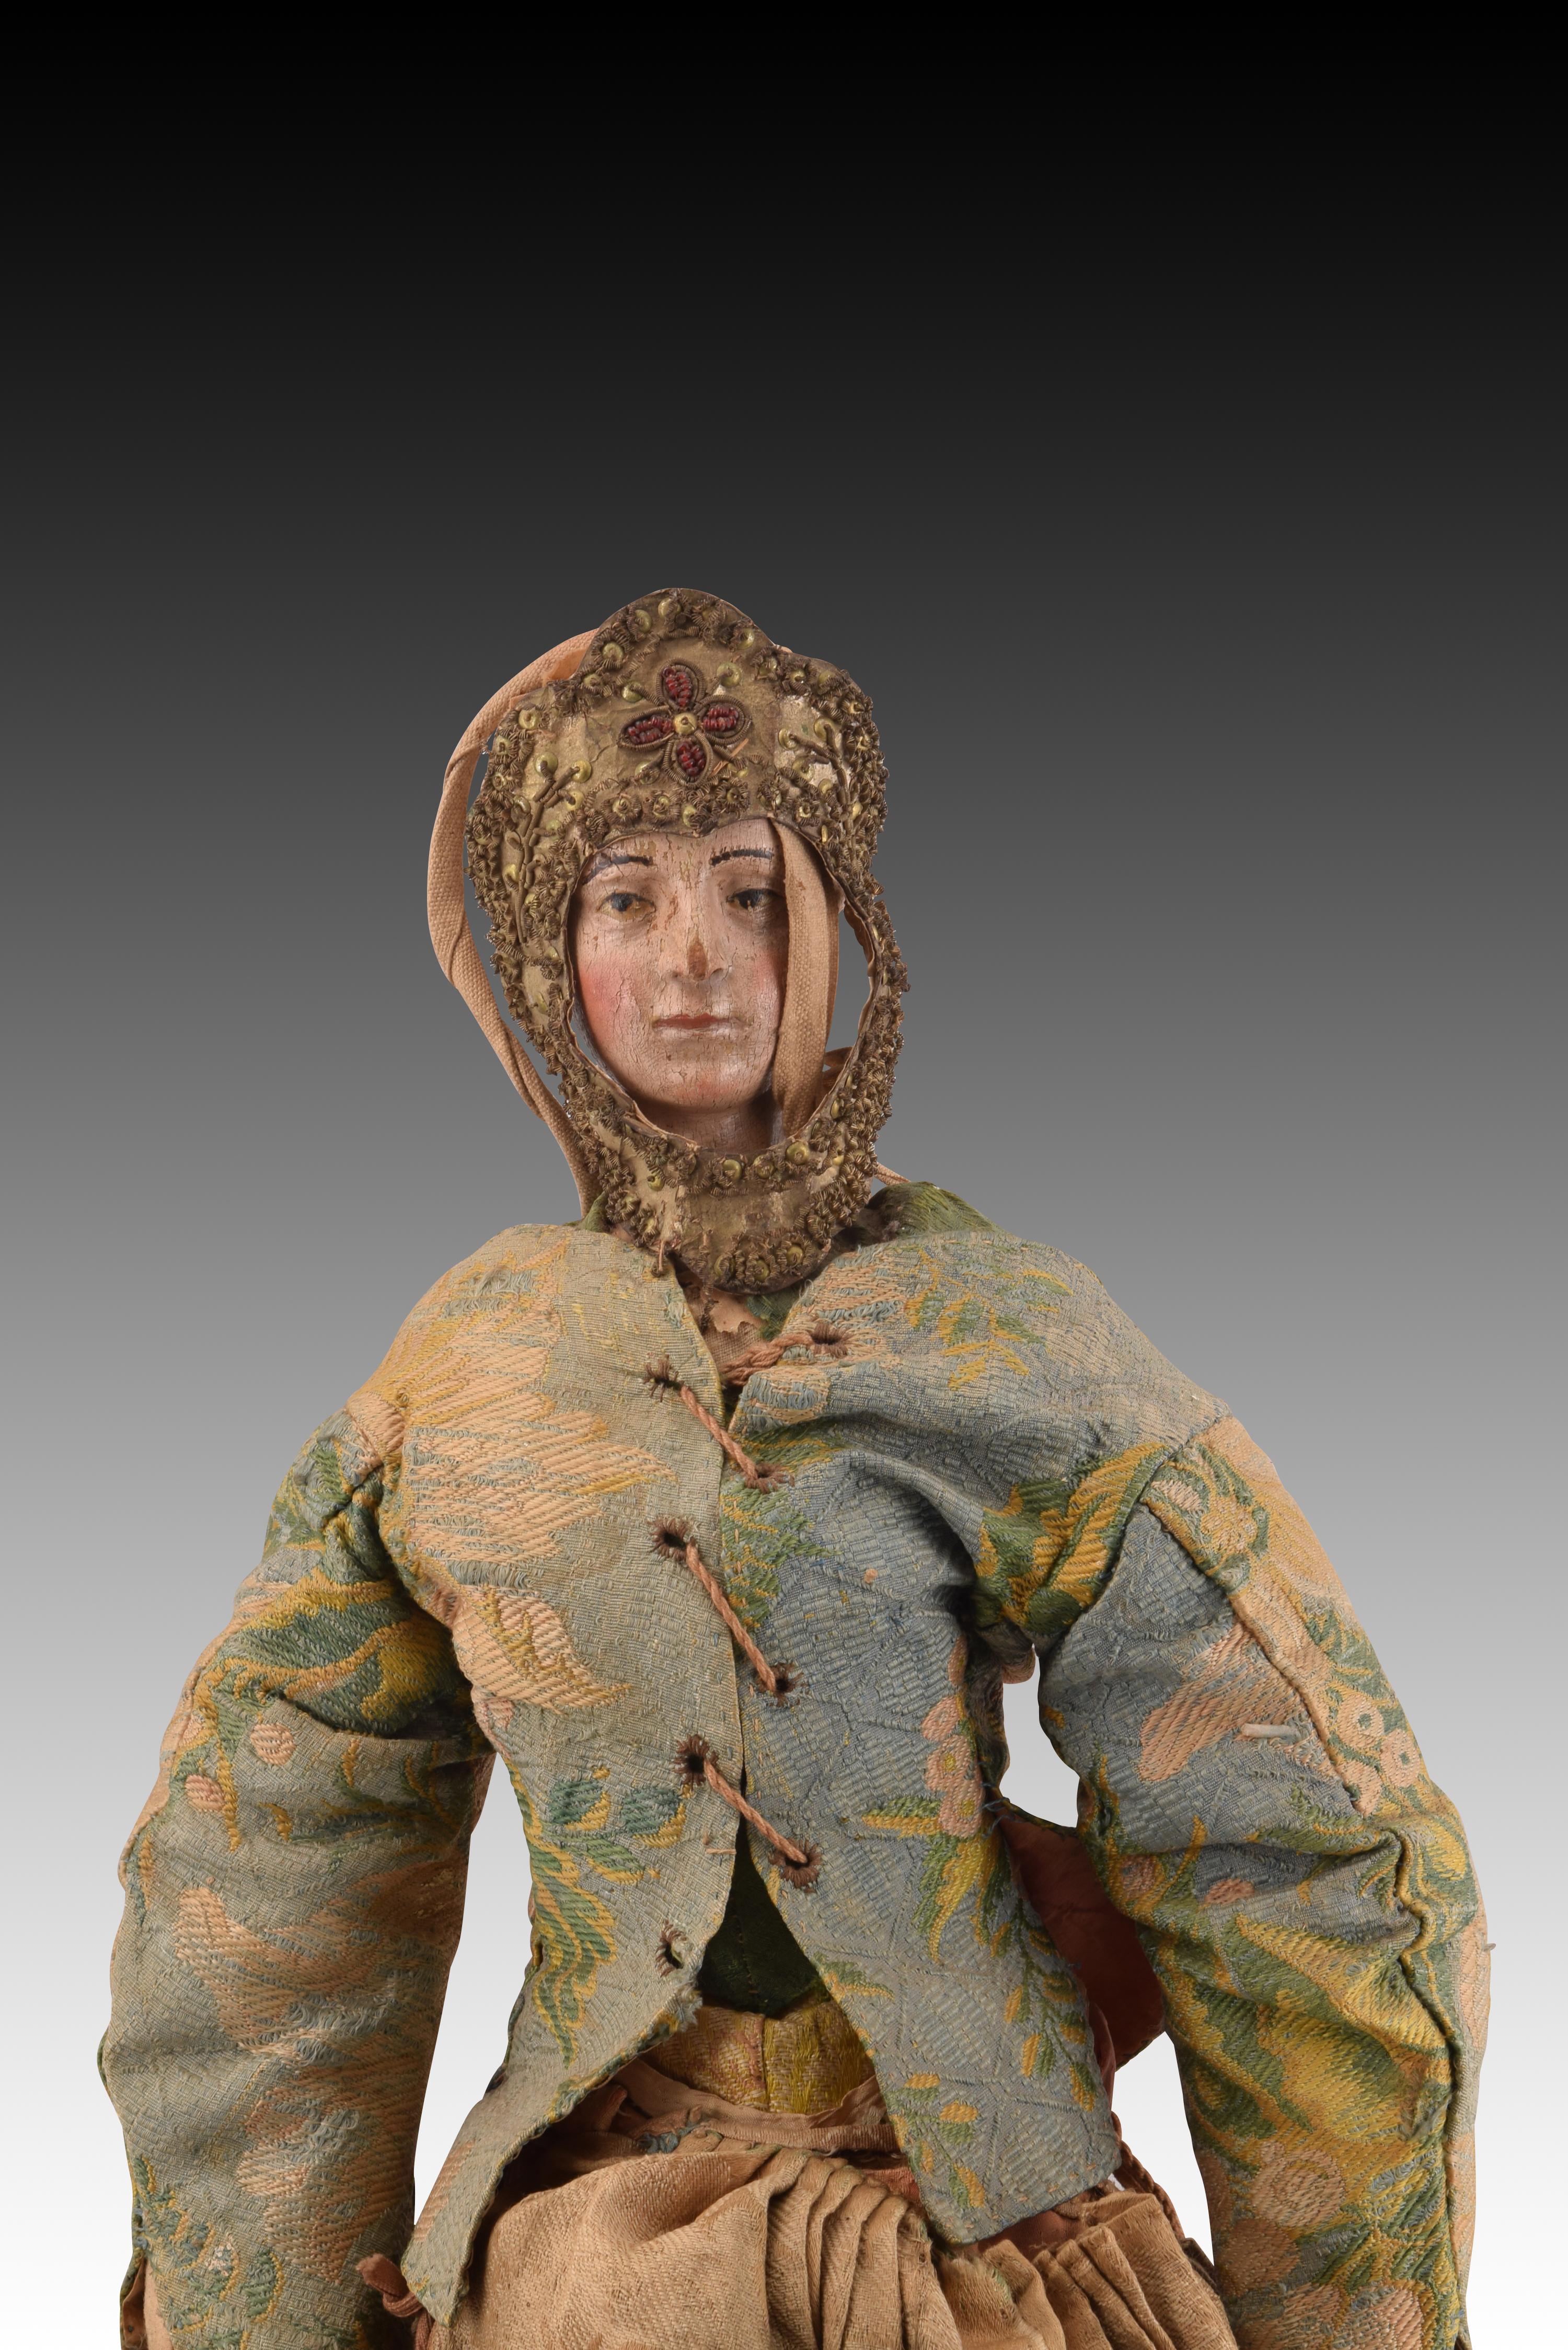 Virgin of Dress. Carved and polychrome wood, etc. Spanish school, 17th century; later clothing. 
Has damage. 
Polychrome wood carving of the type of dress or dress that has a series of garments: skirt, blouse, rostrillo, etc. Religious sculptures